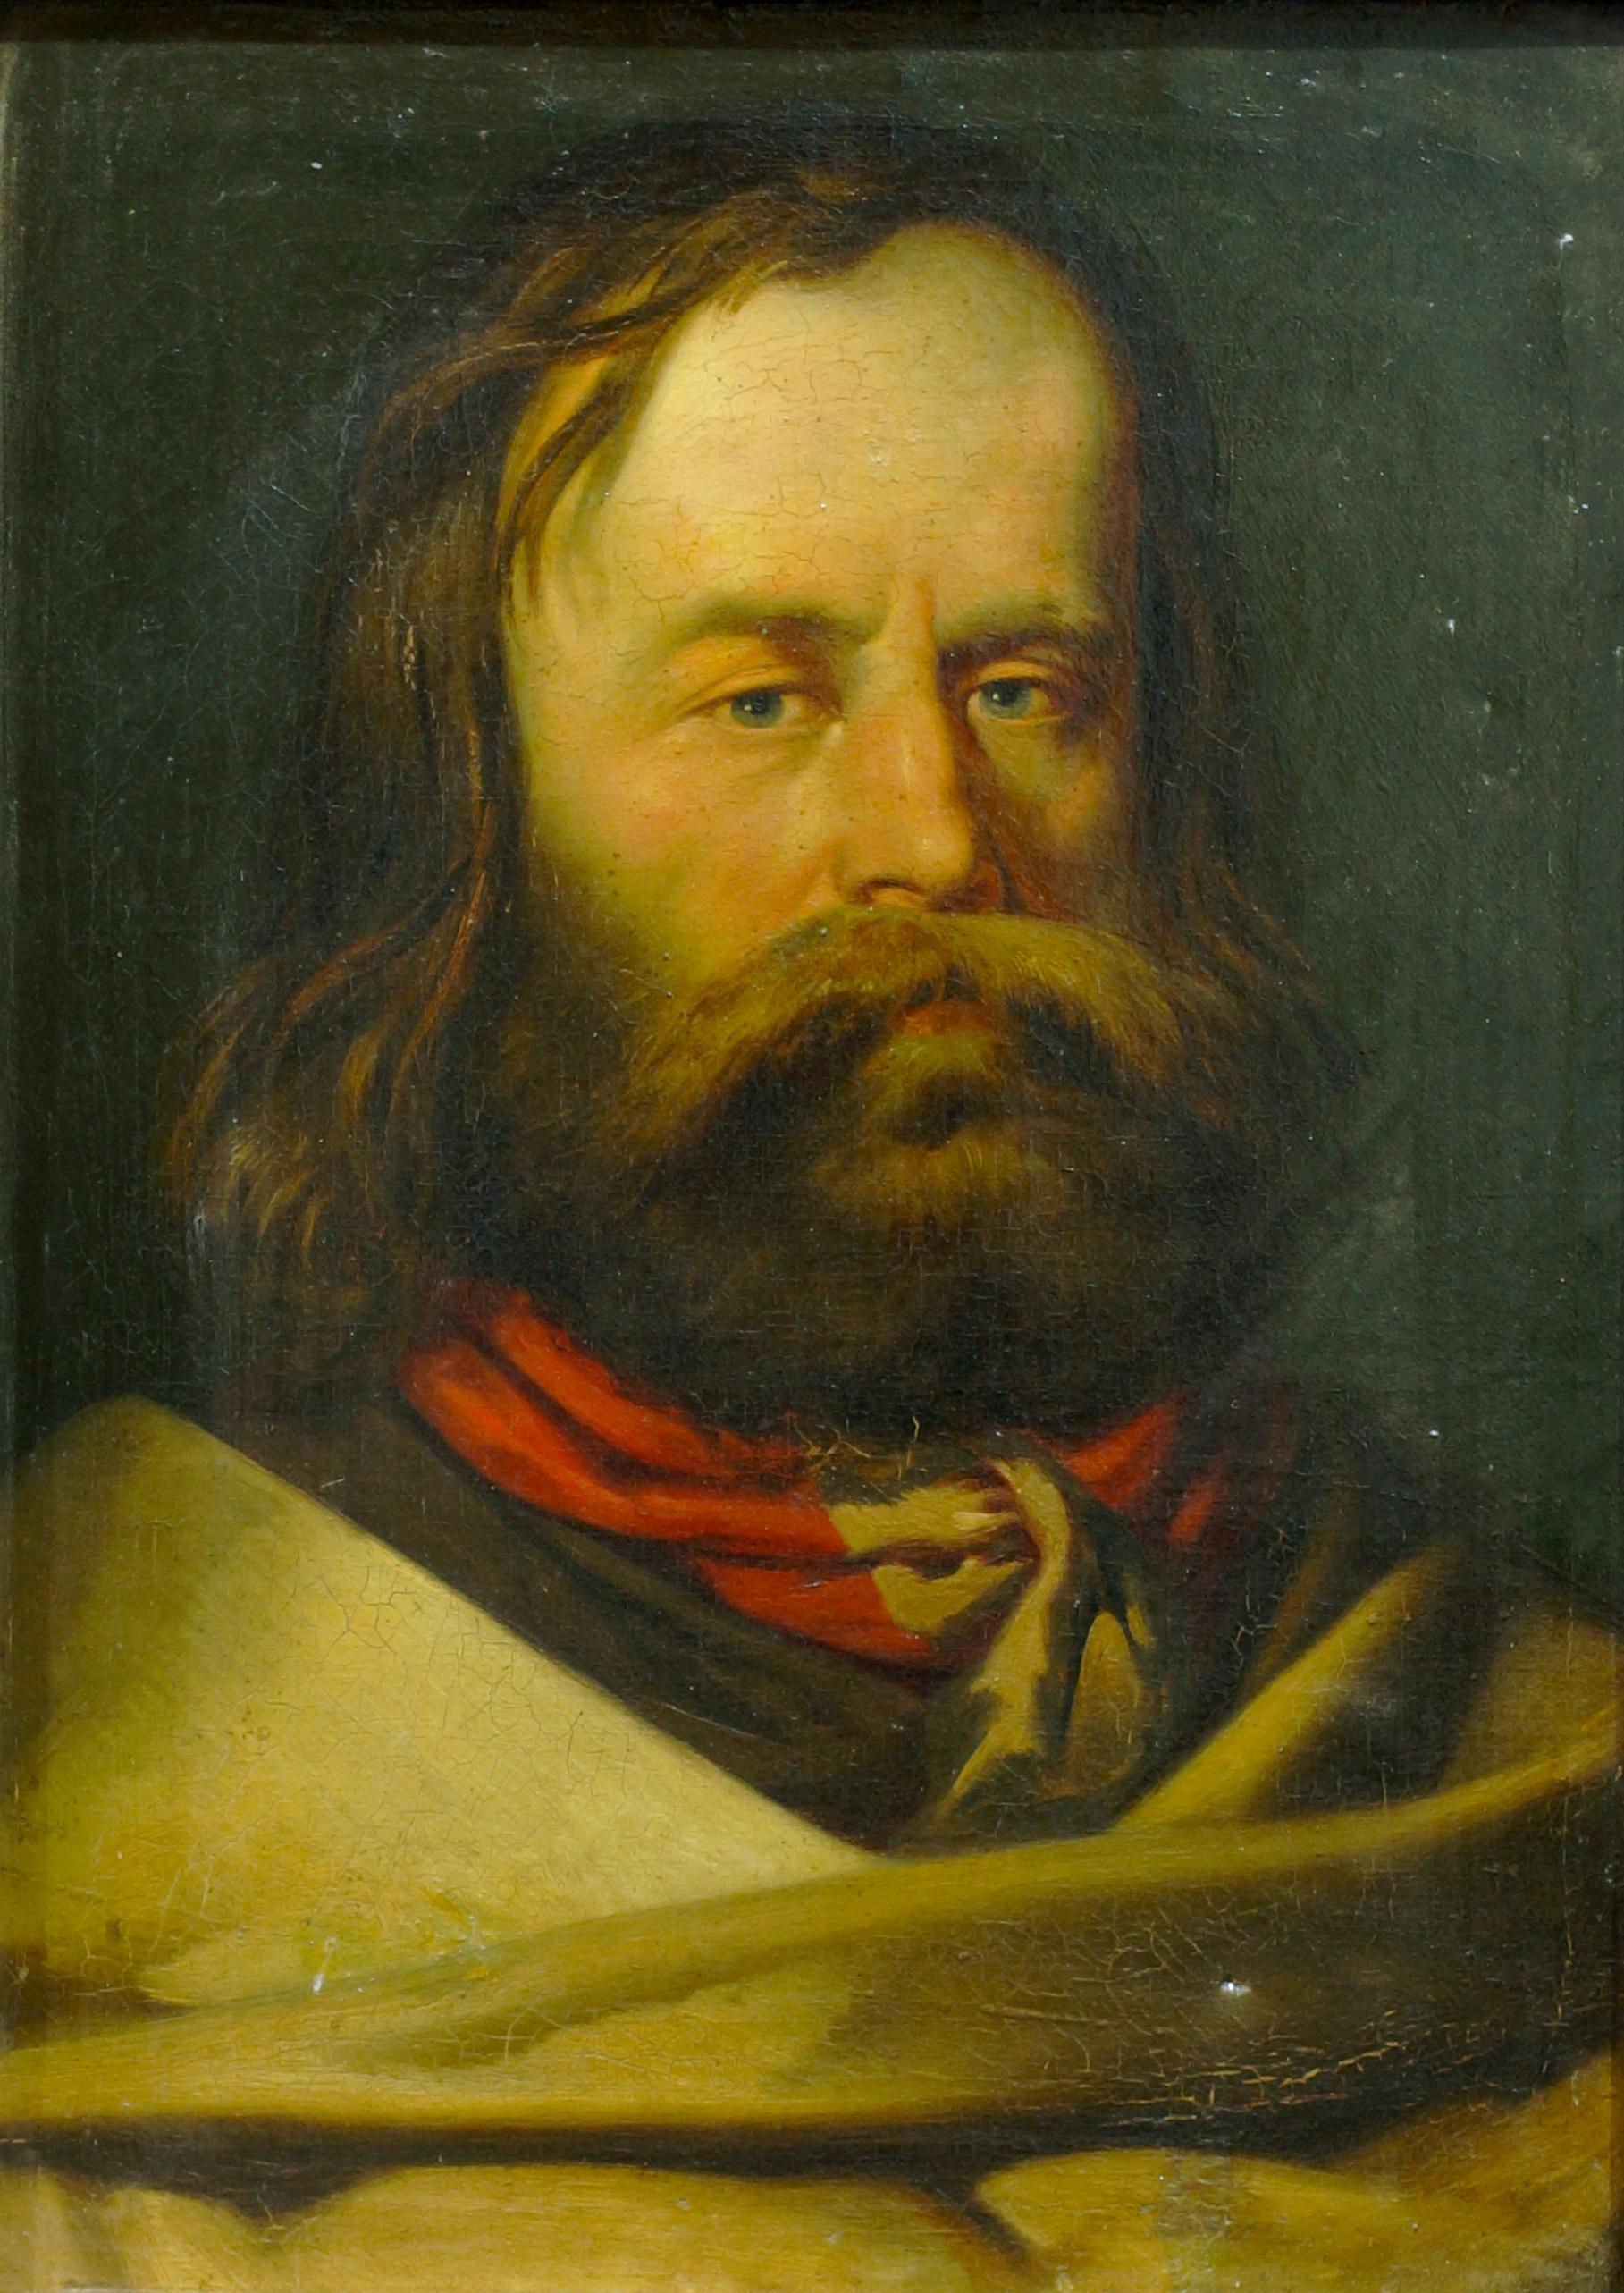 Portrait of Young Giuseppe Garibaldi - Oil on Canvas 19th Century - Painting by Unknown